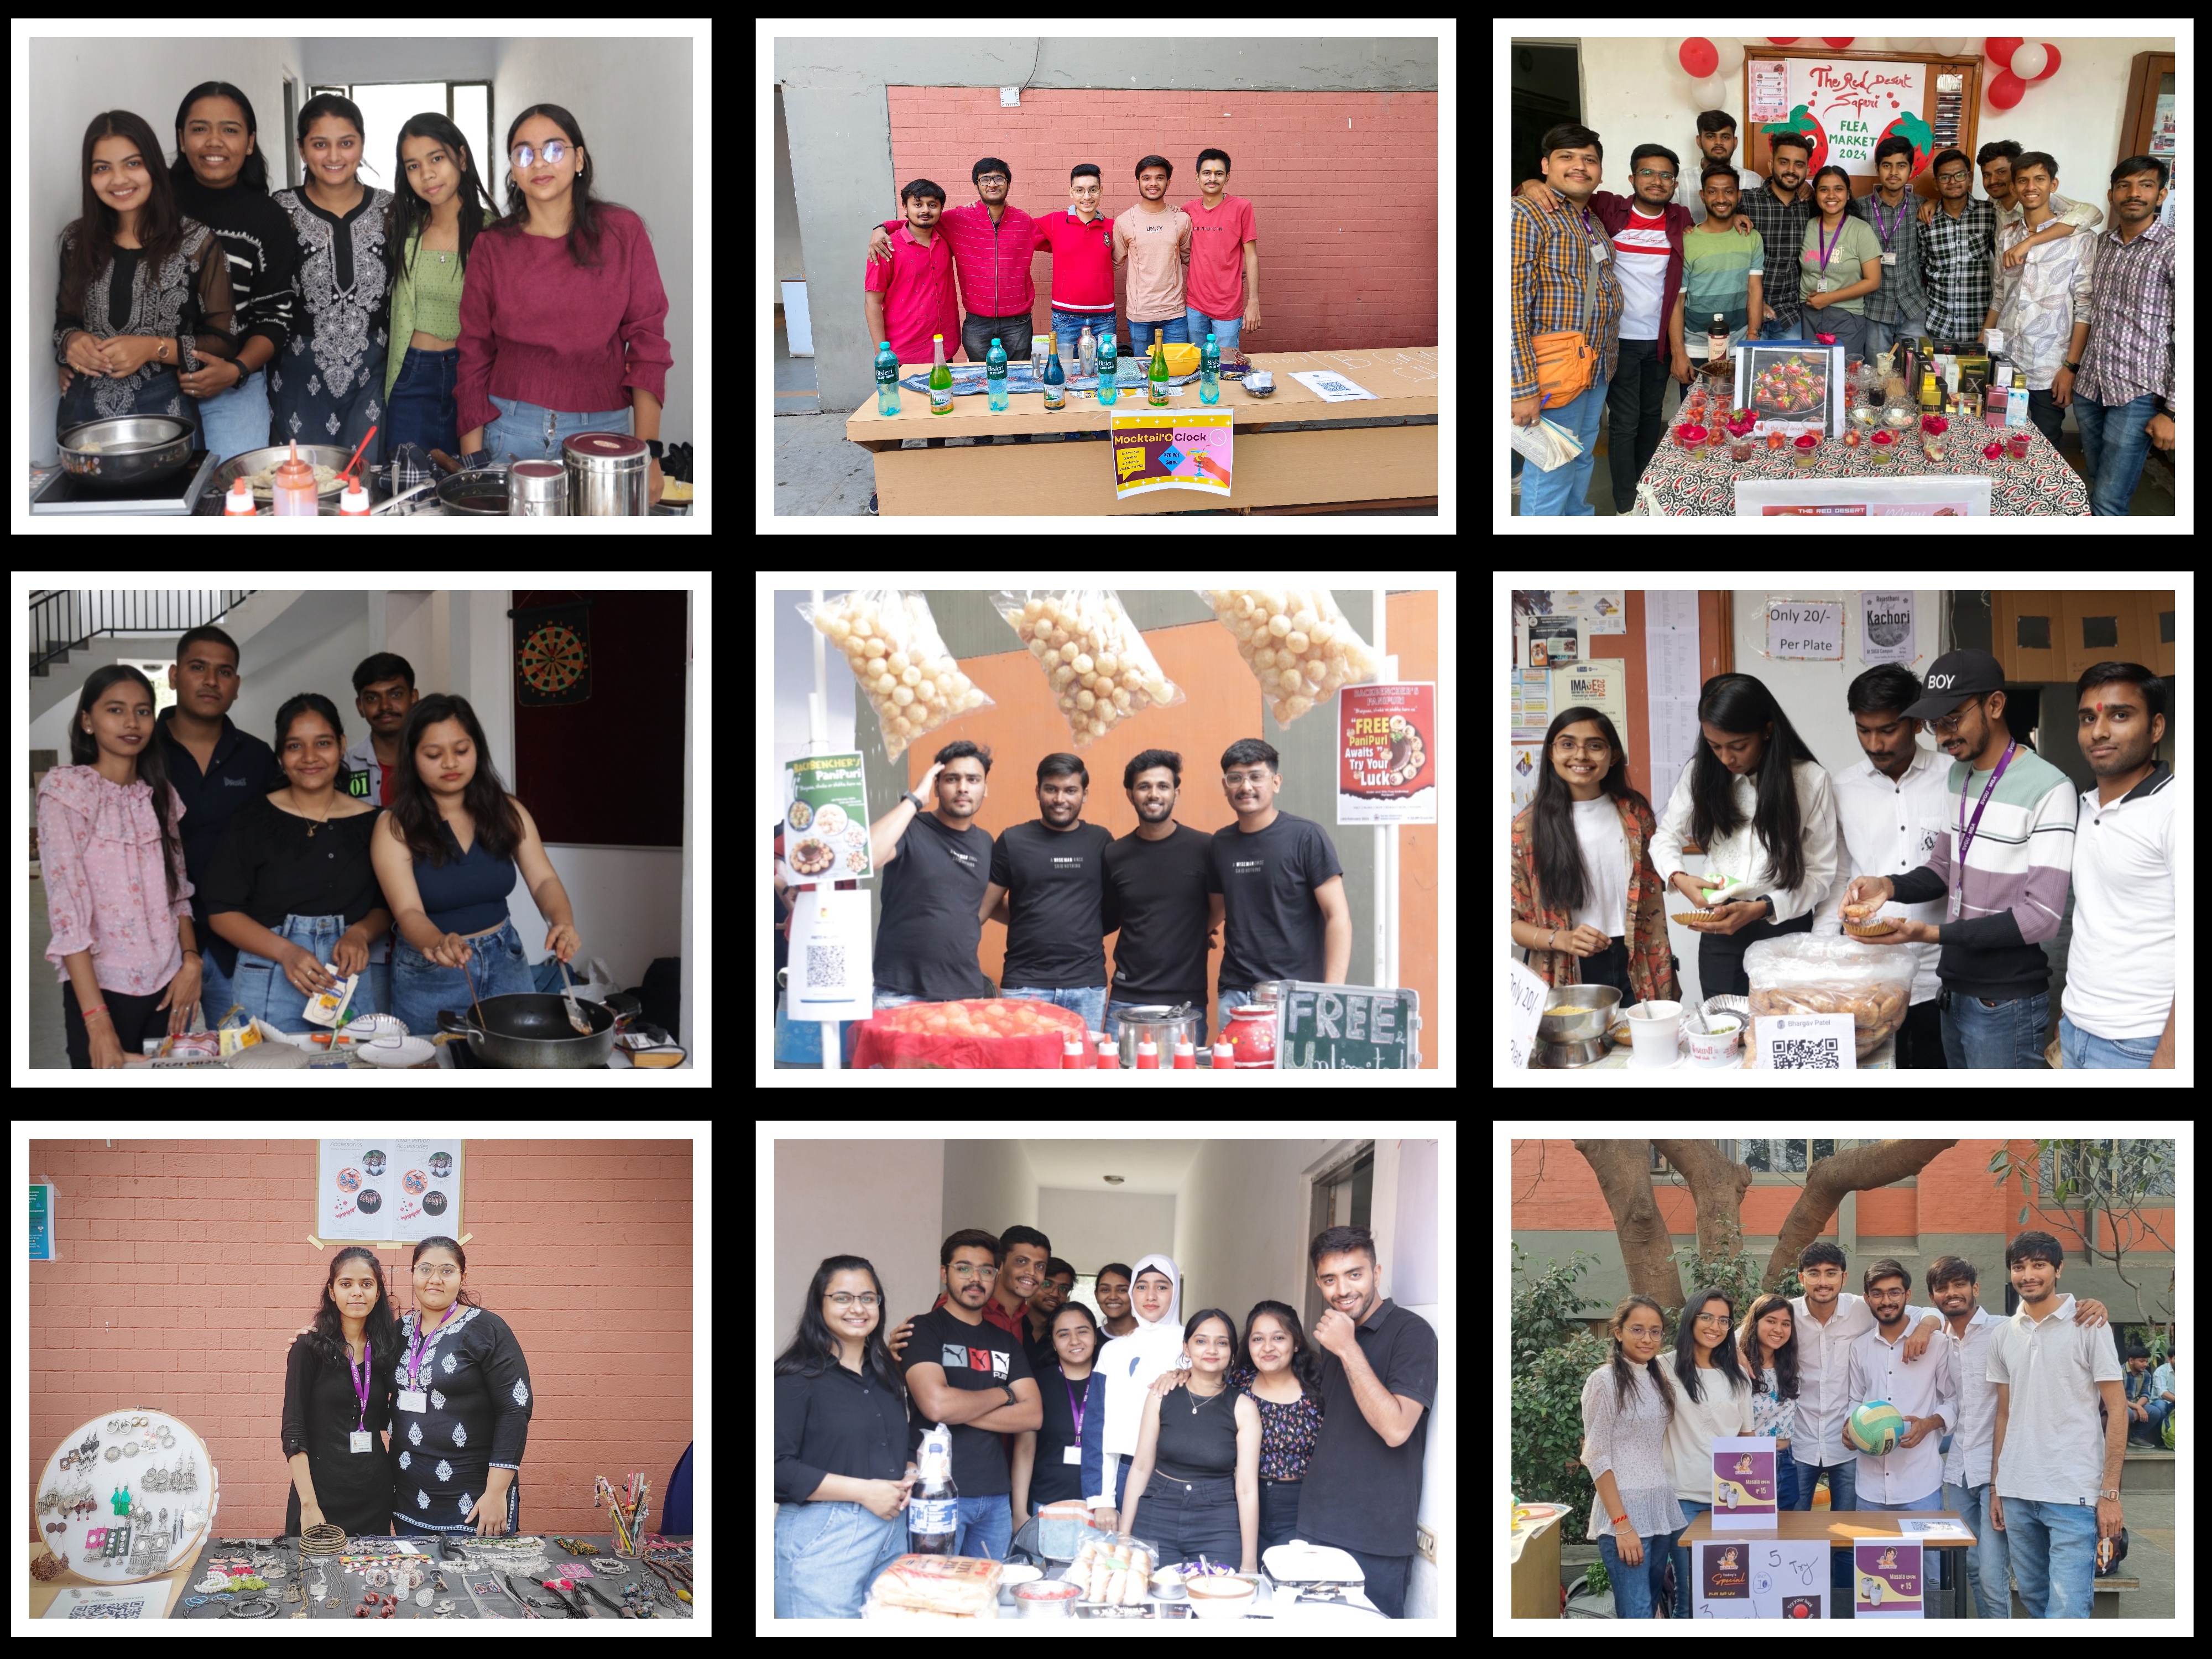 The Flea Market organized by the MBA Programme